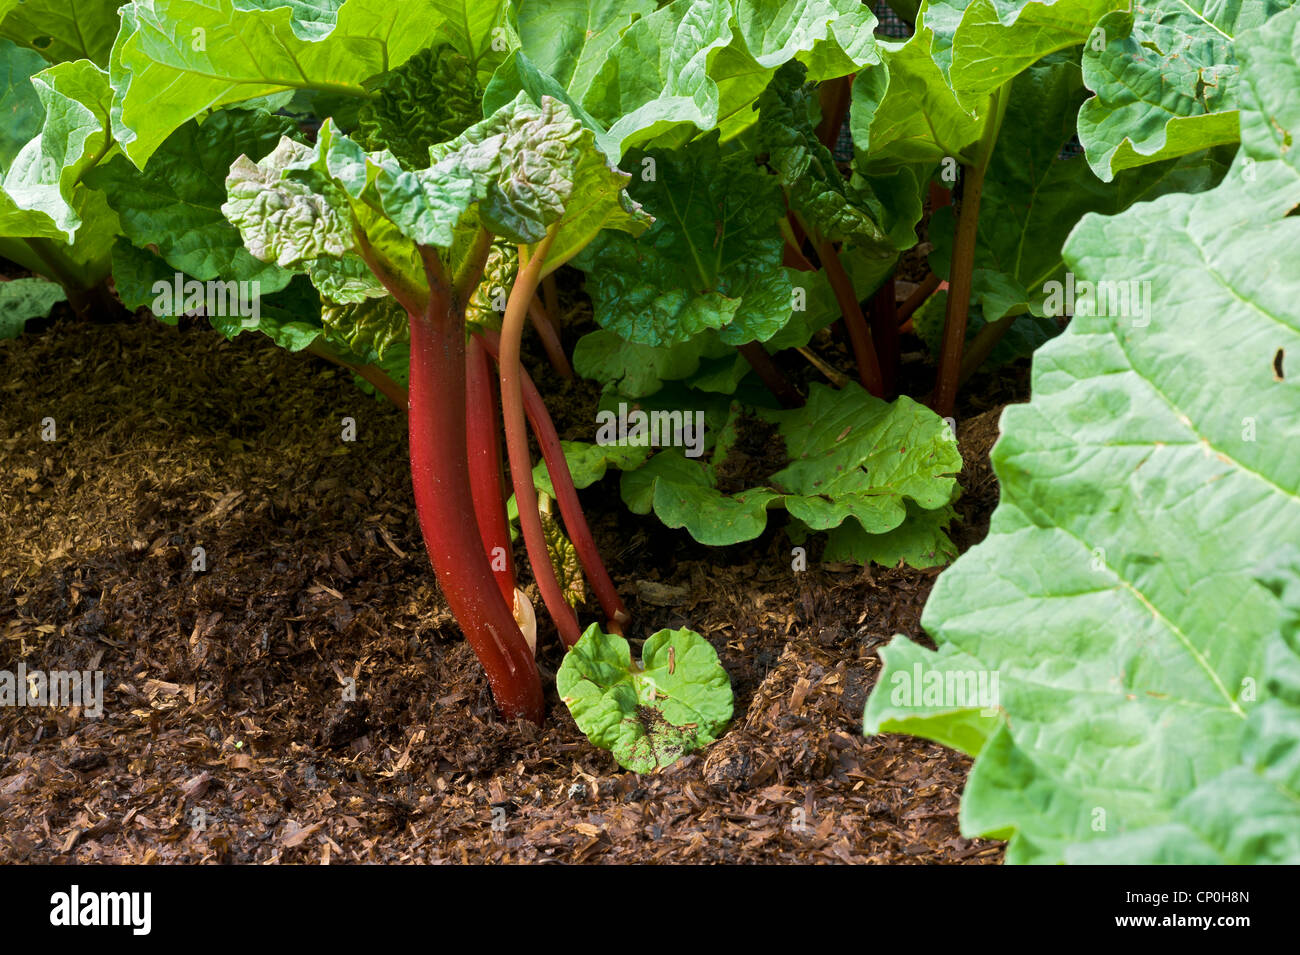 Rhubarb which has been forced under a plant pot Stock Photo